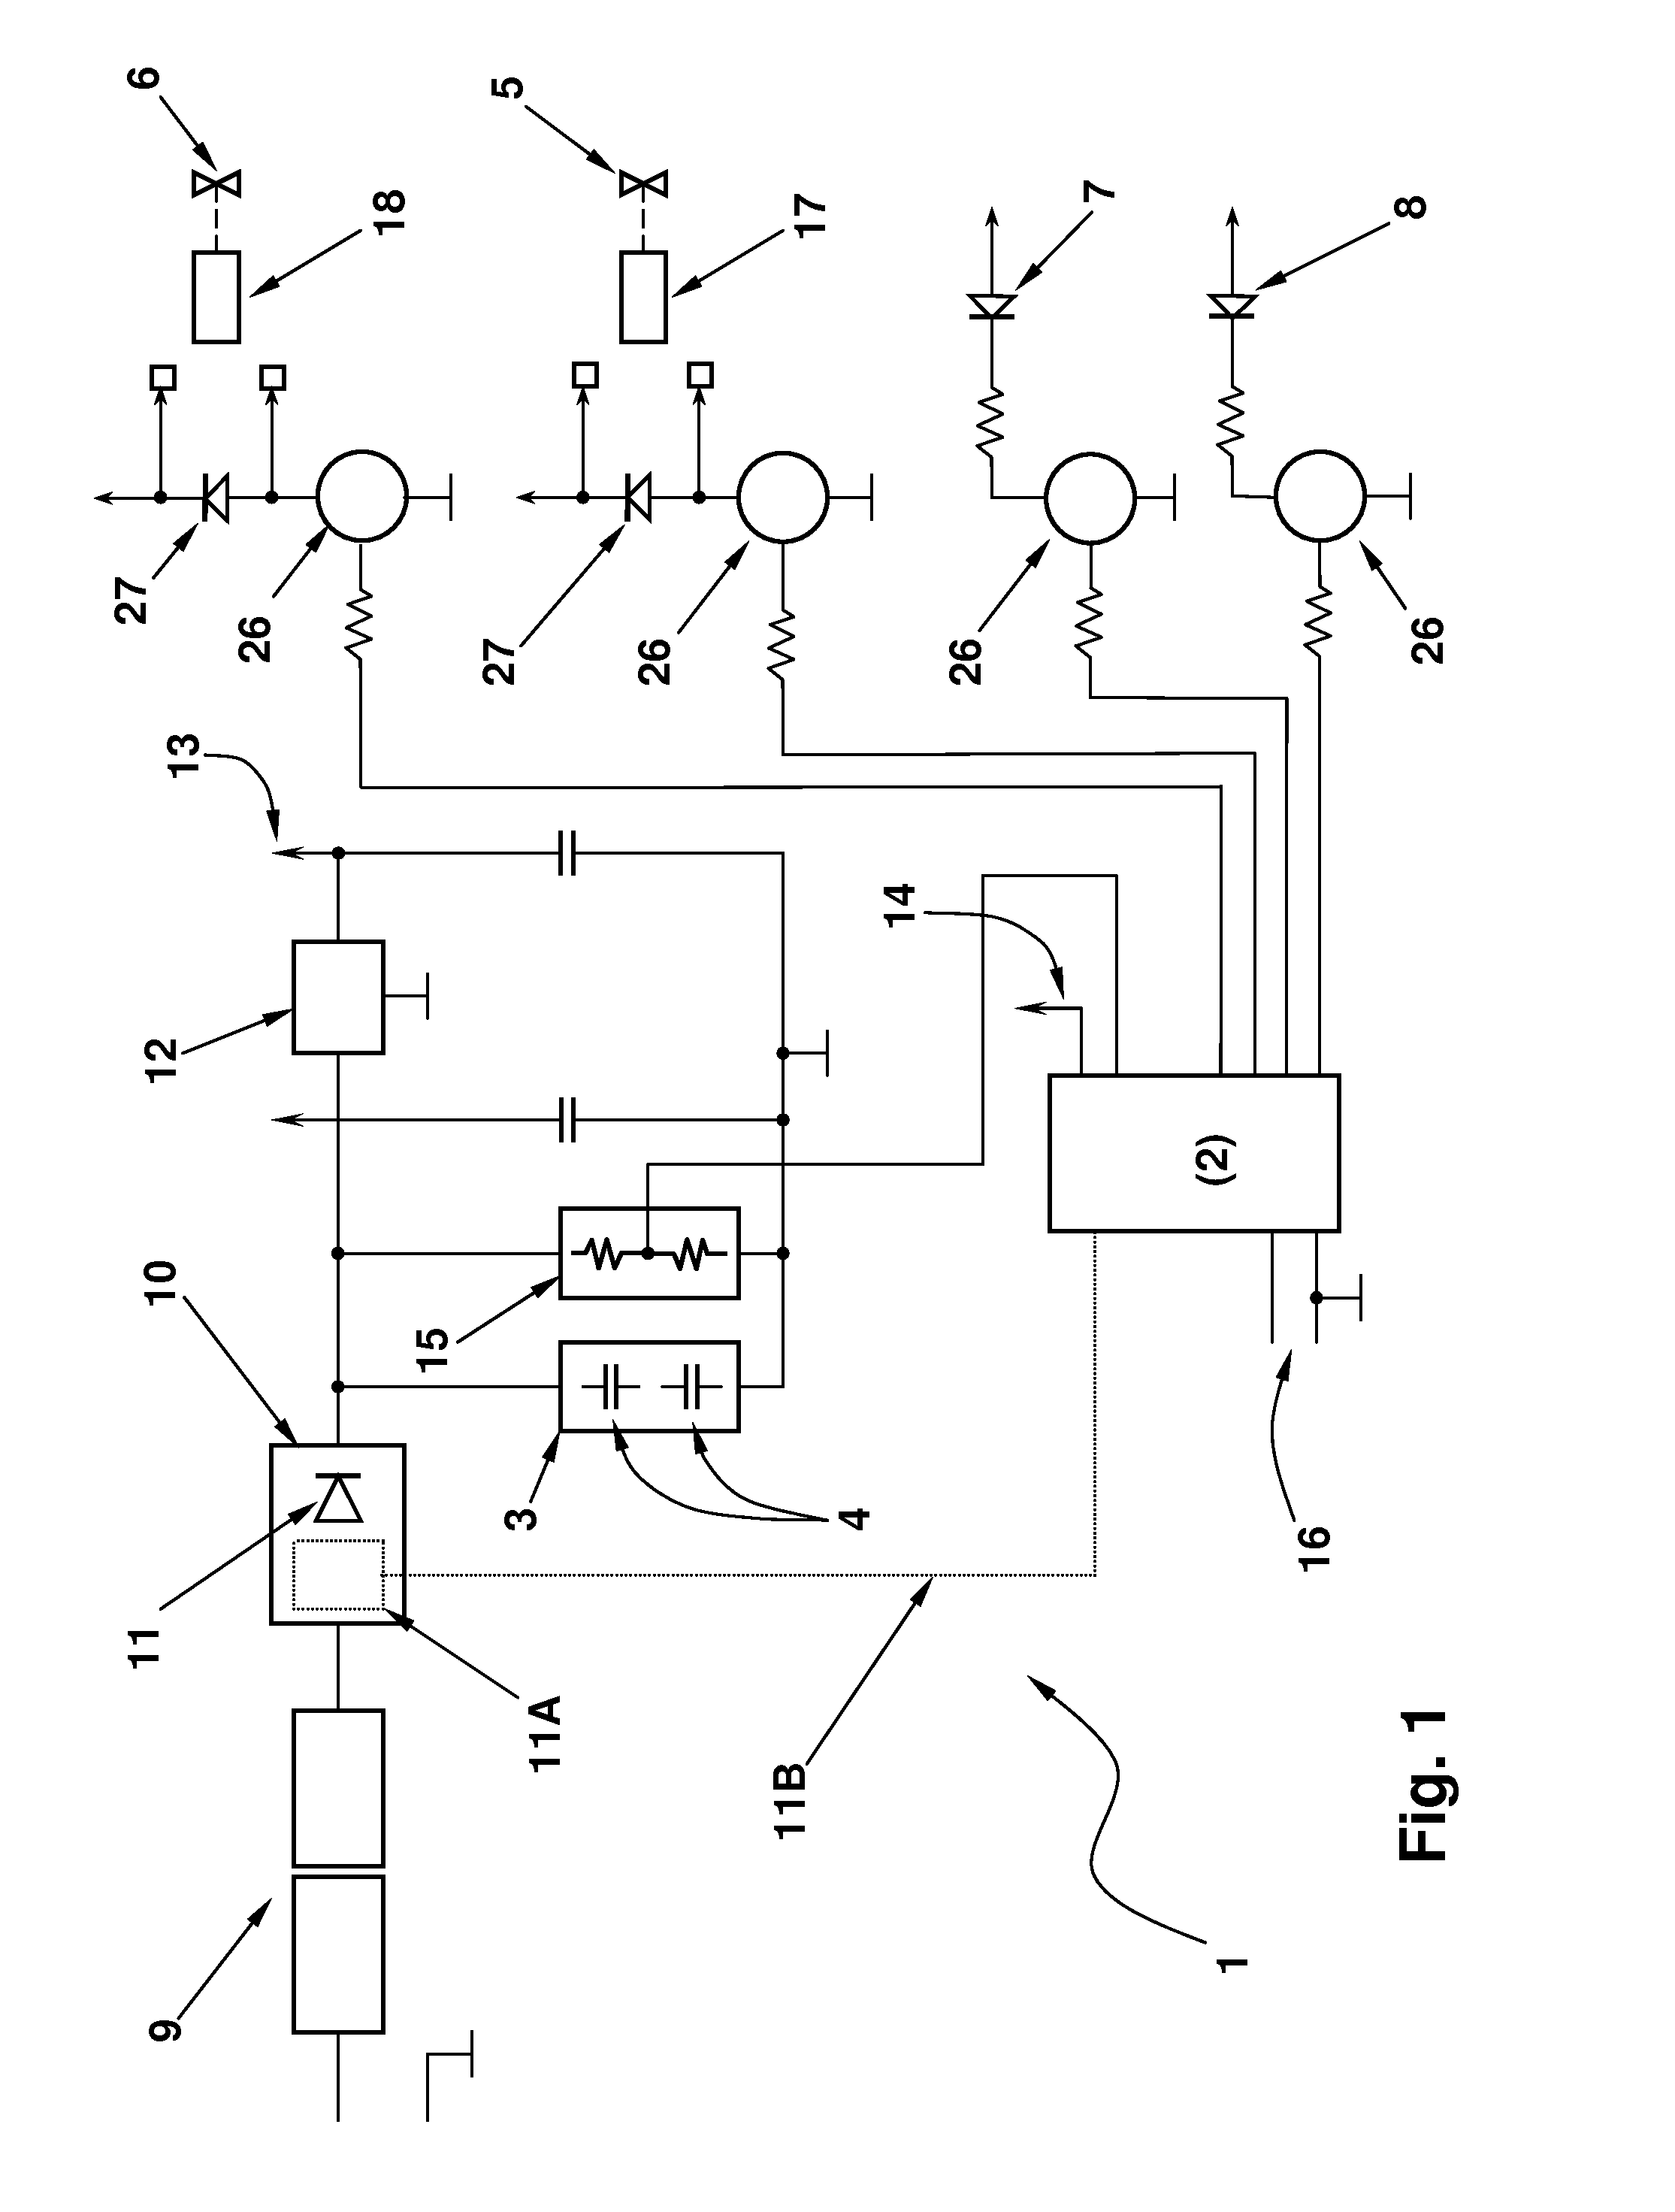 Power supply equipment for fuel dispensing nozzle